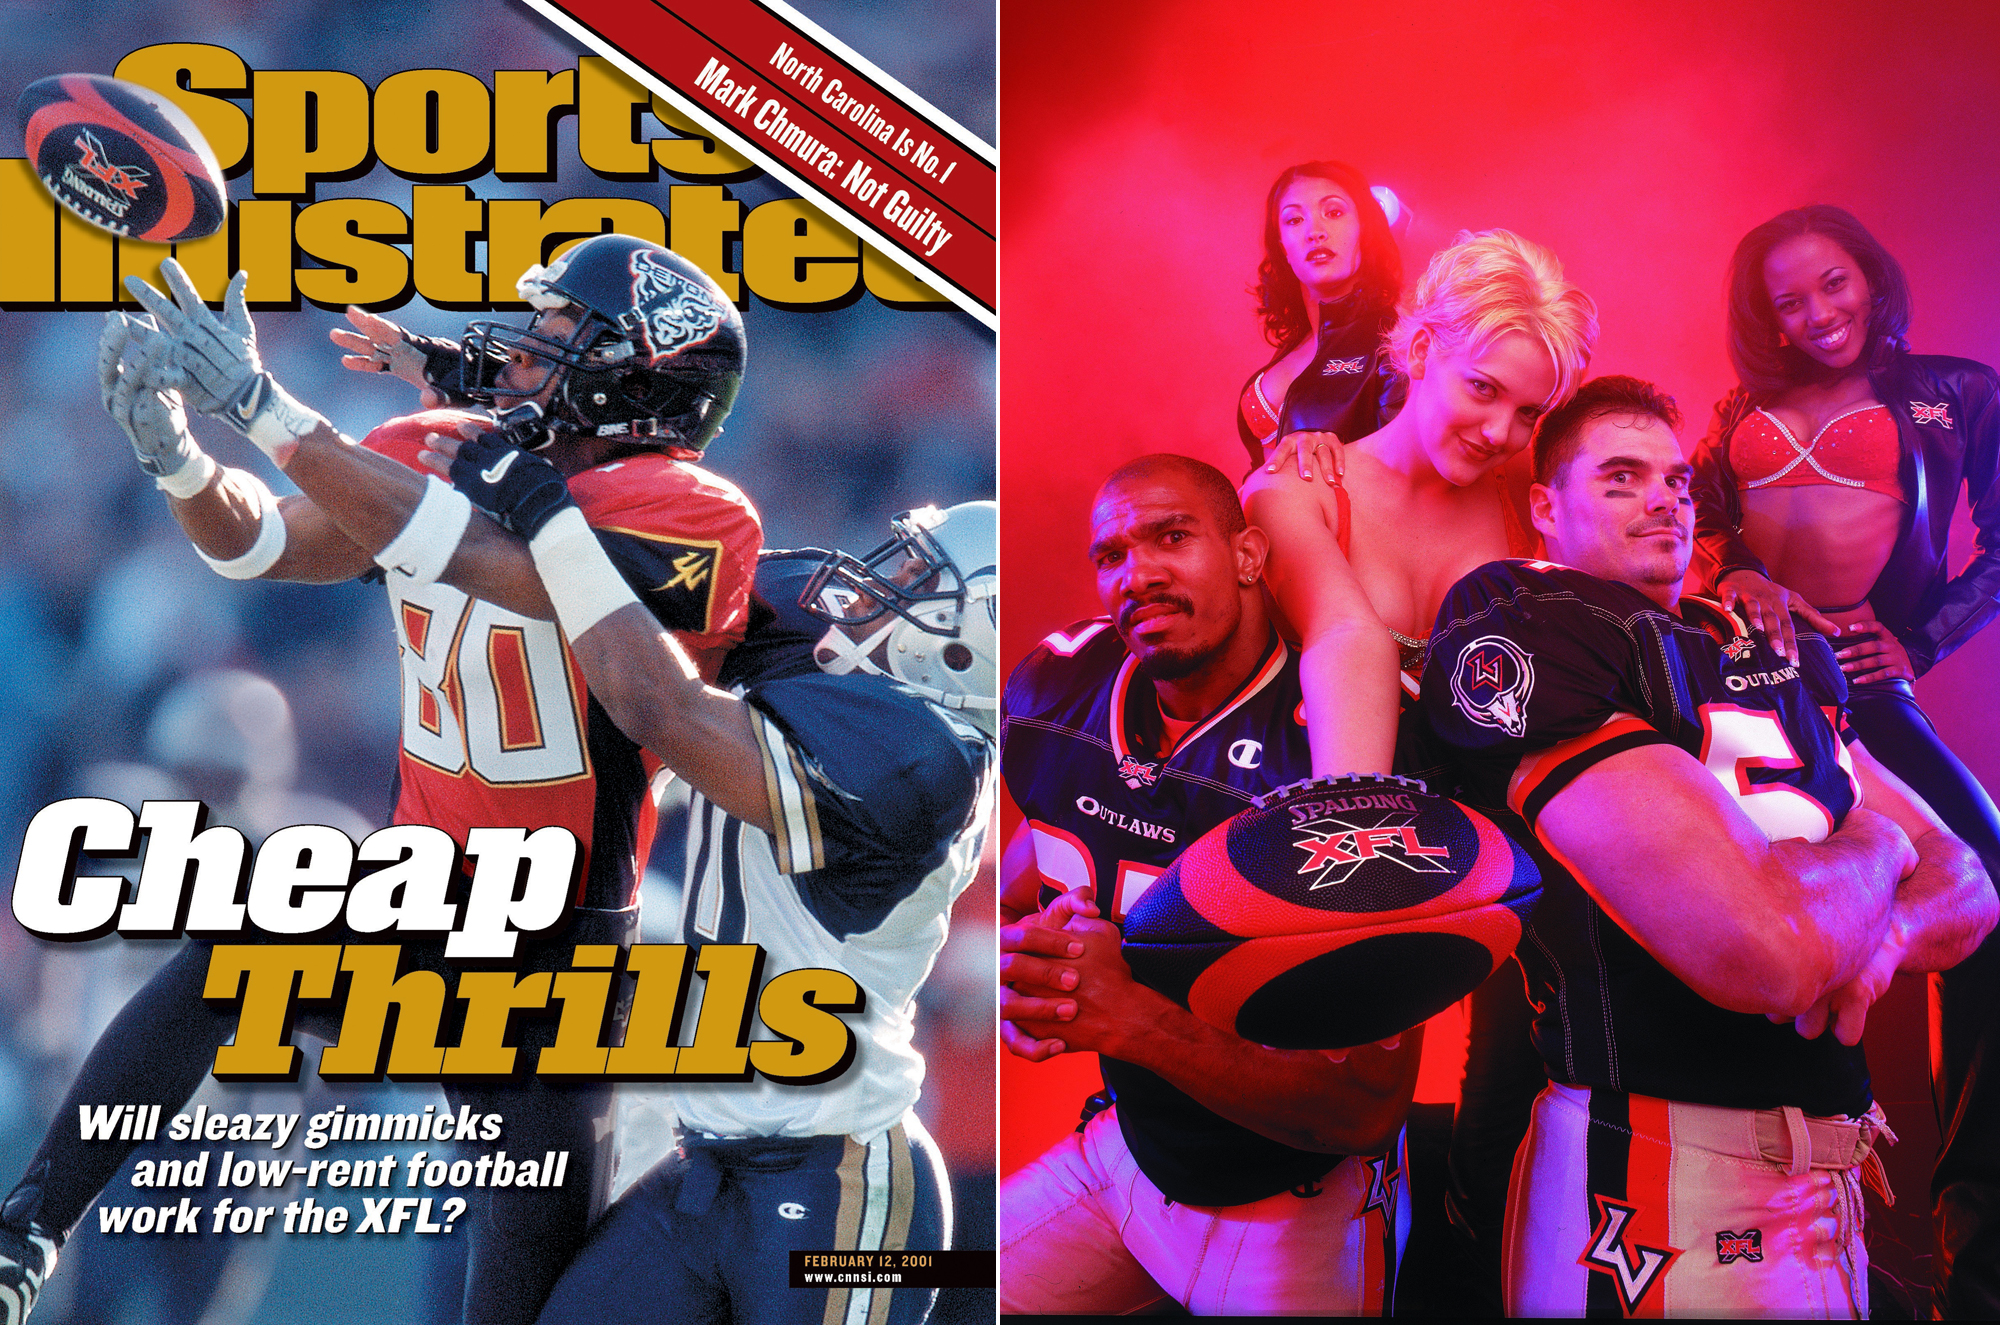 The original XFL was heavy on glitz and thumbed its nose at the NFL. It lasted one season.